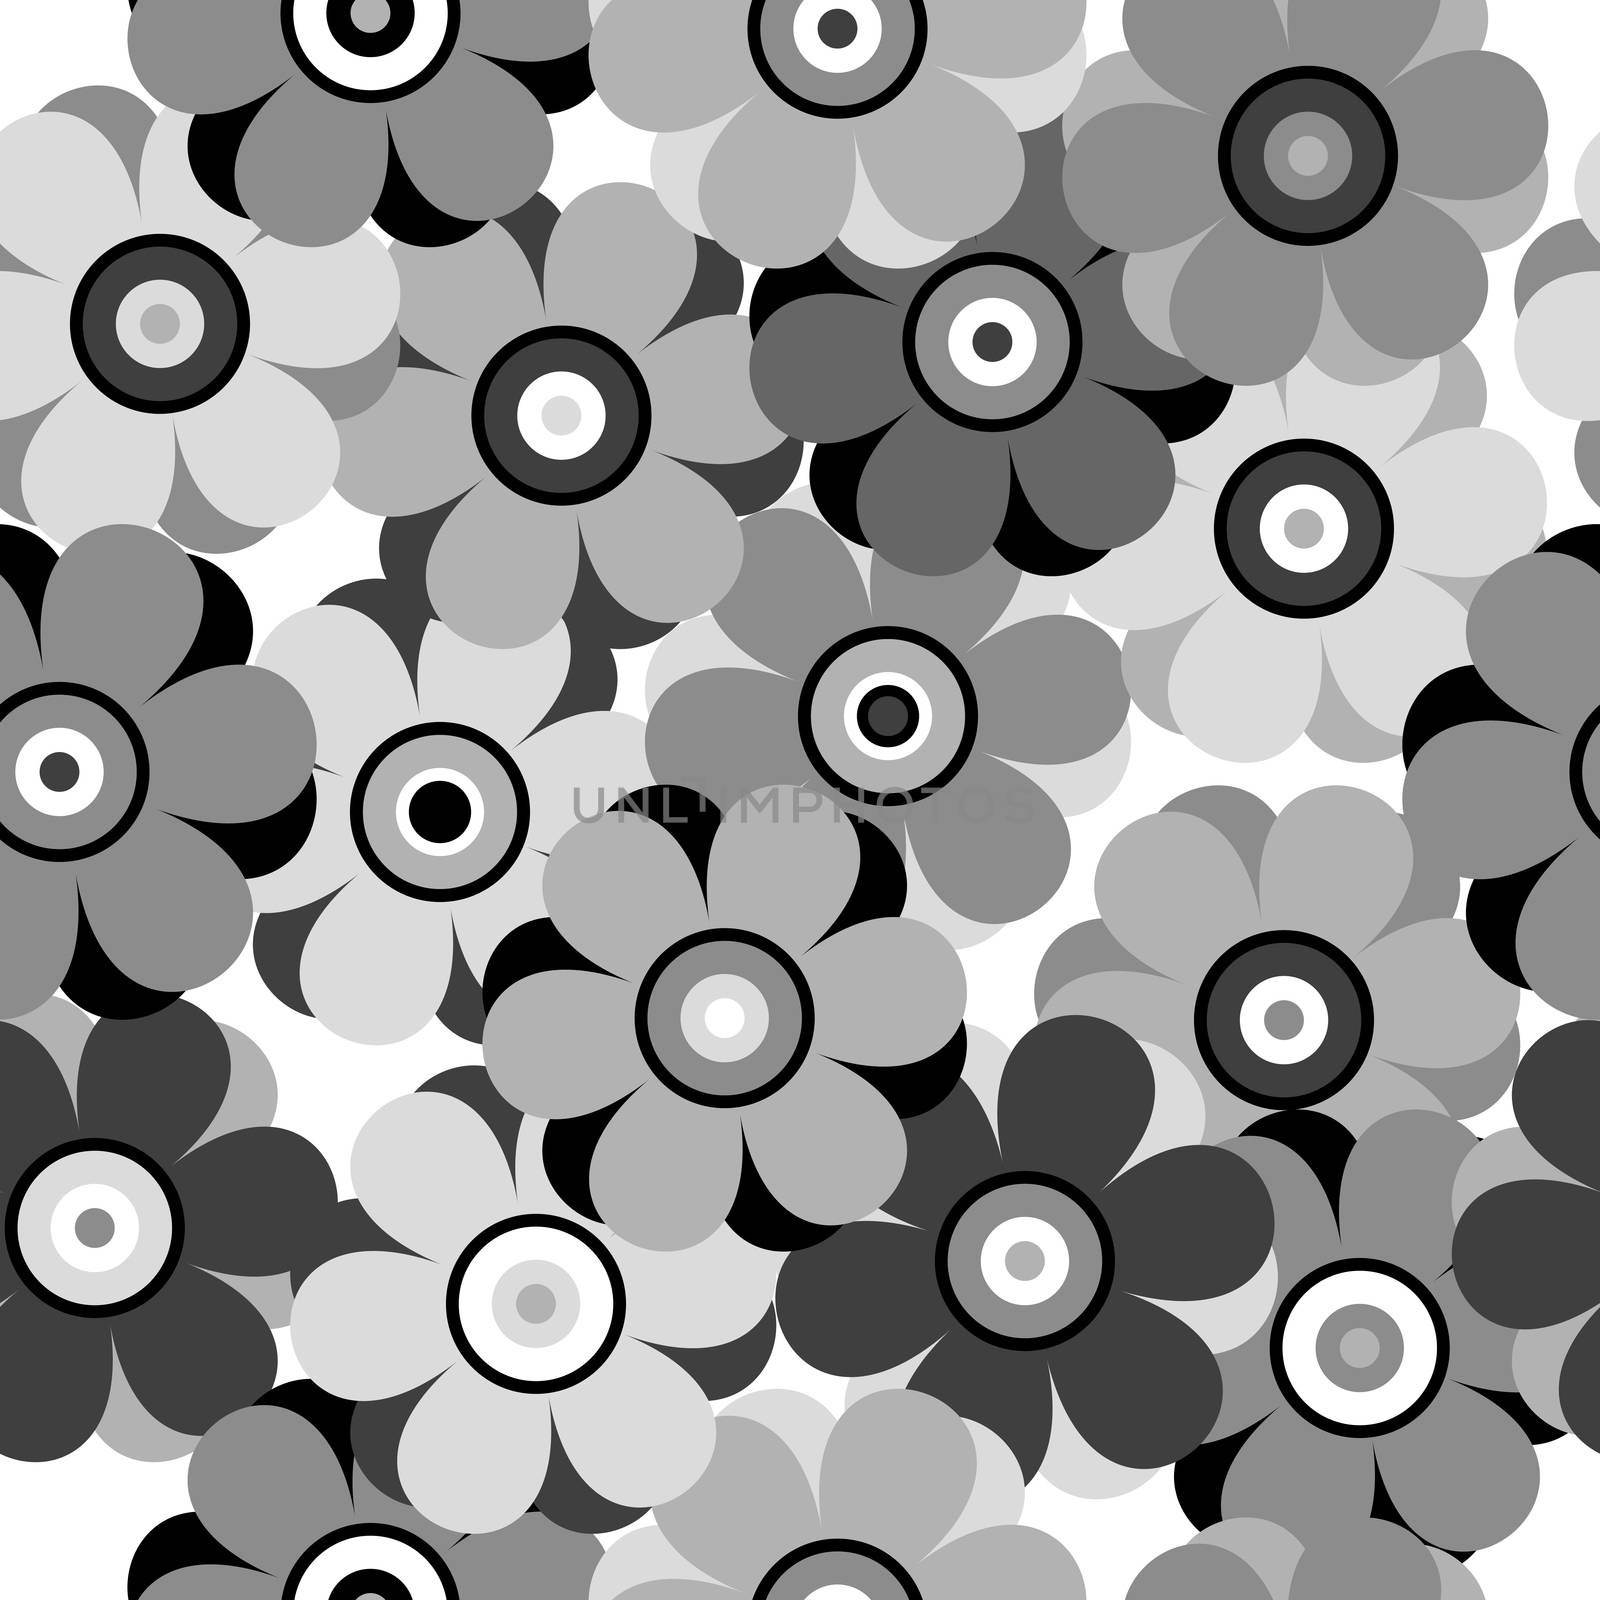 Black and white floral seamless pattern by hibrida13